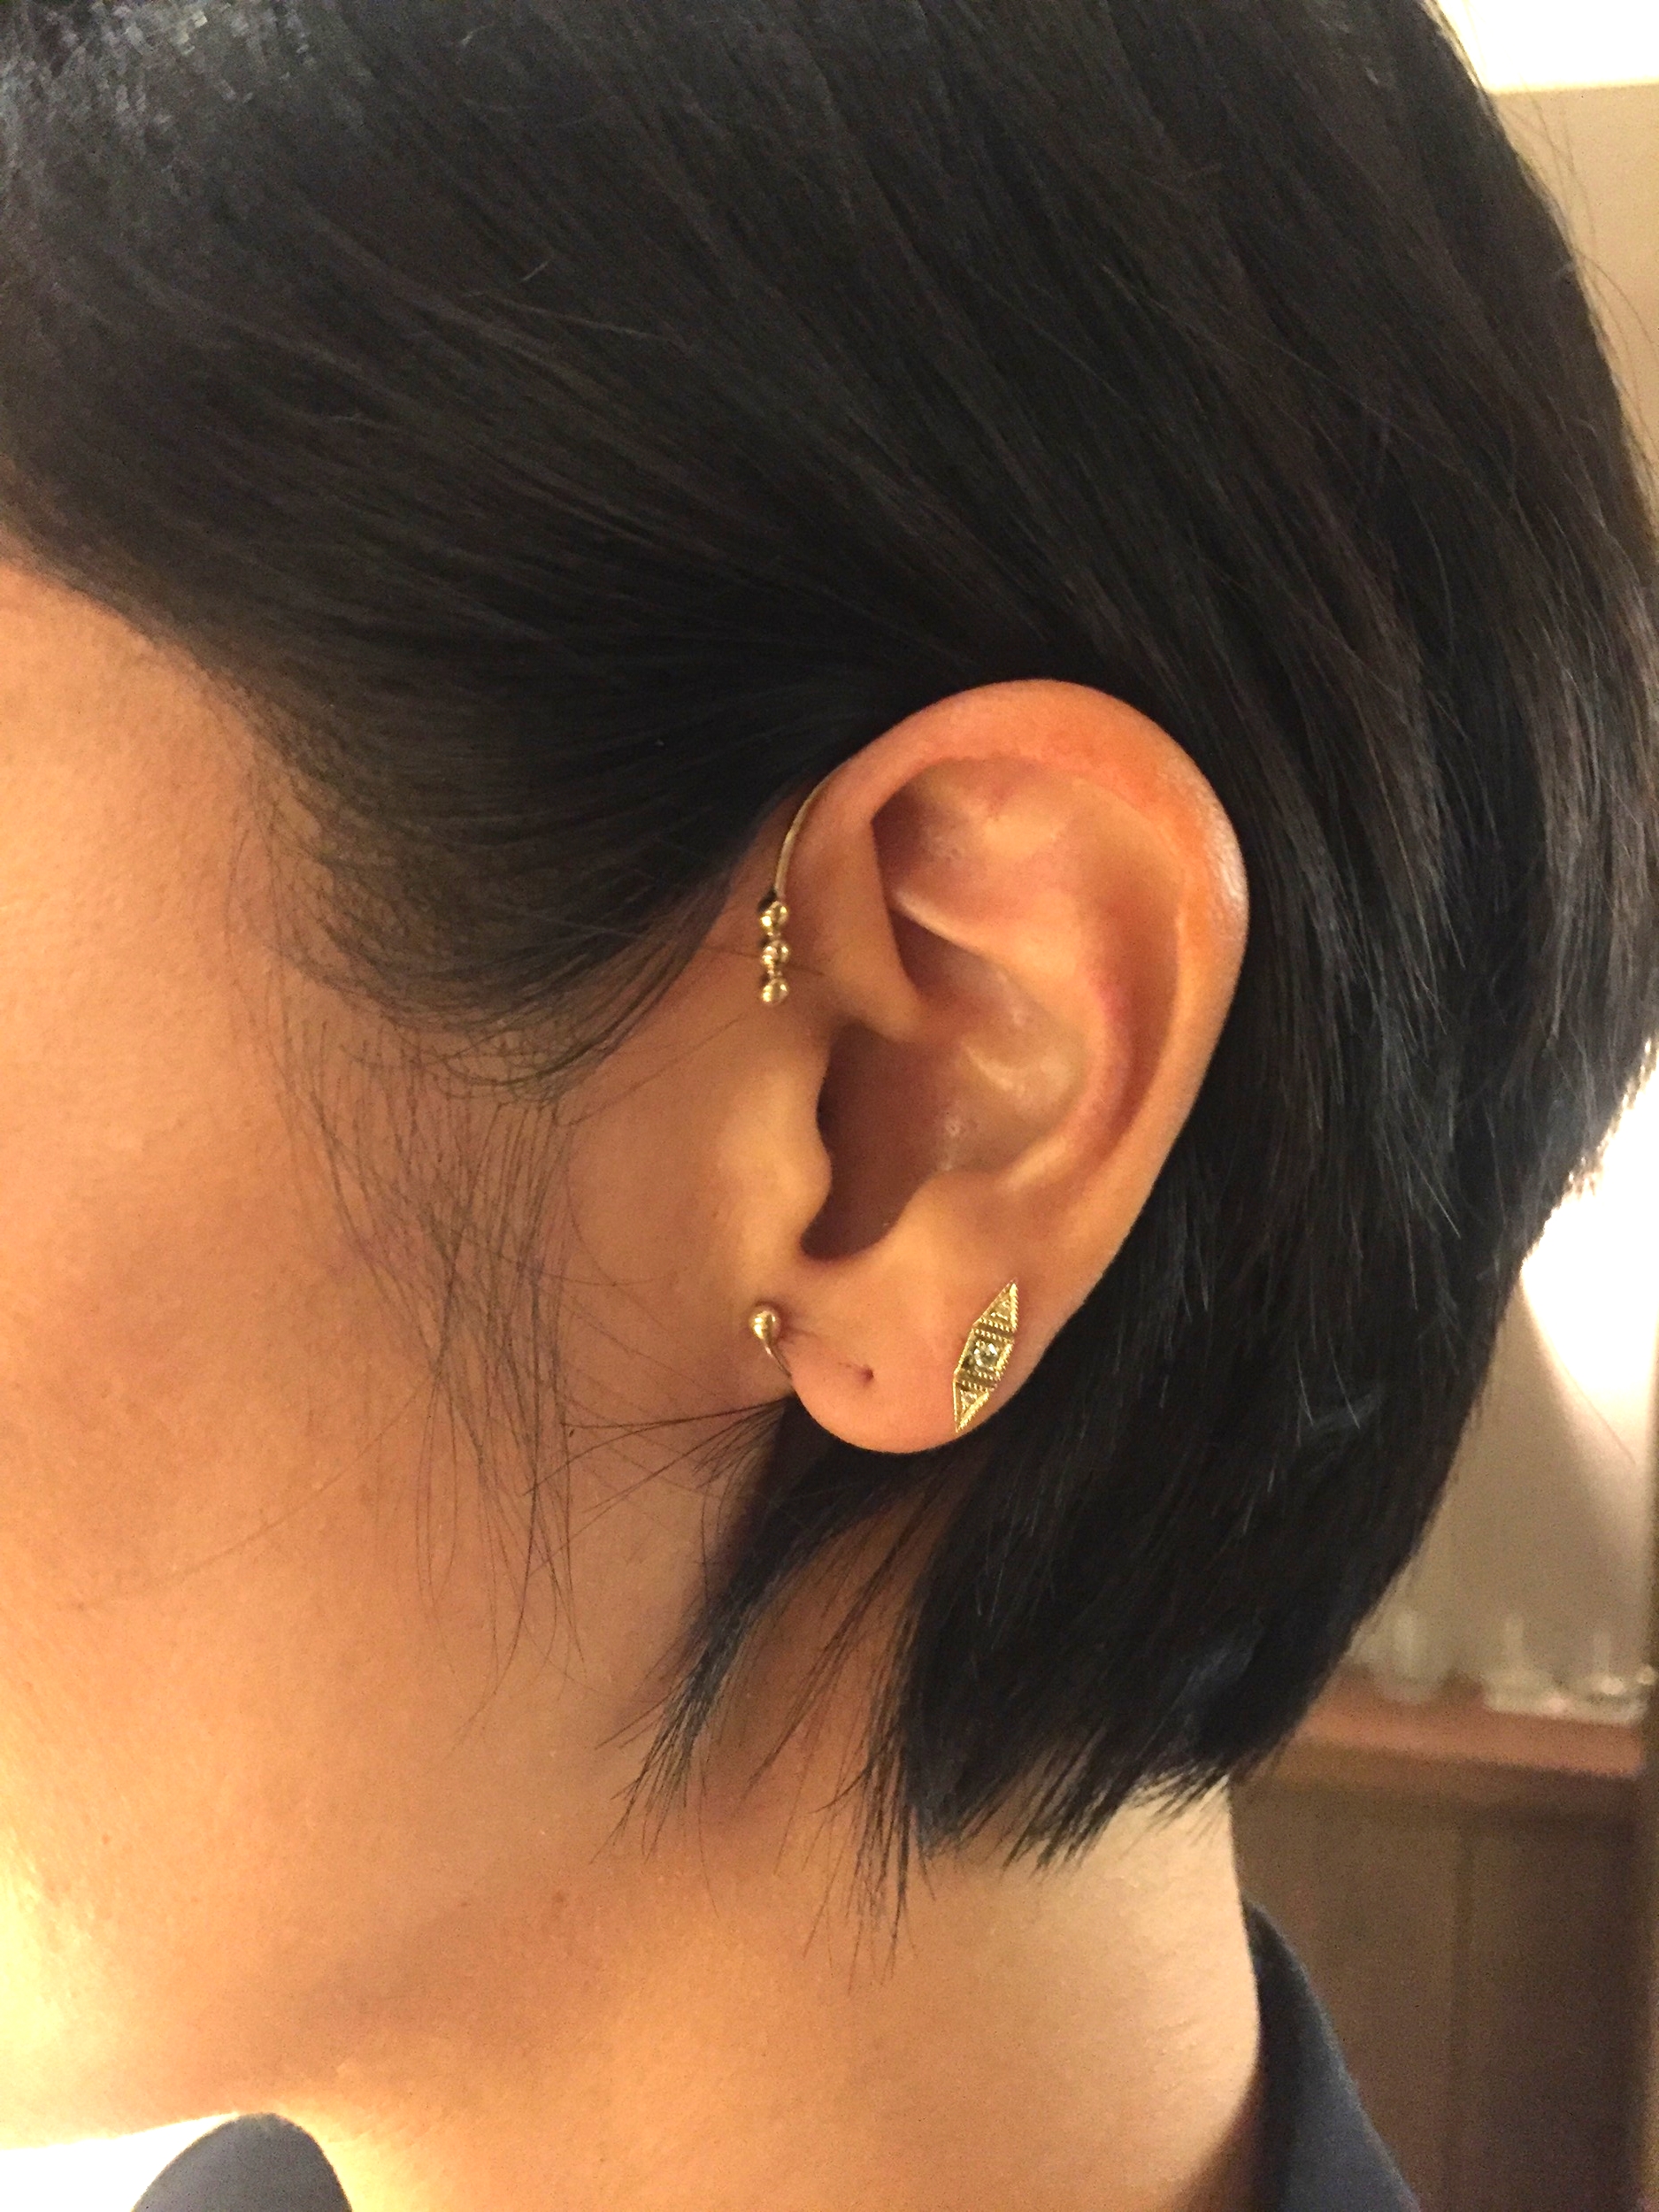   Jennie, herself, in a strong ear situation.  